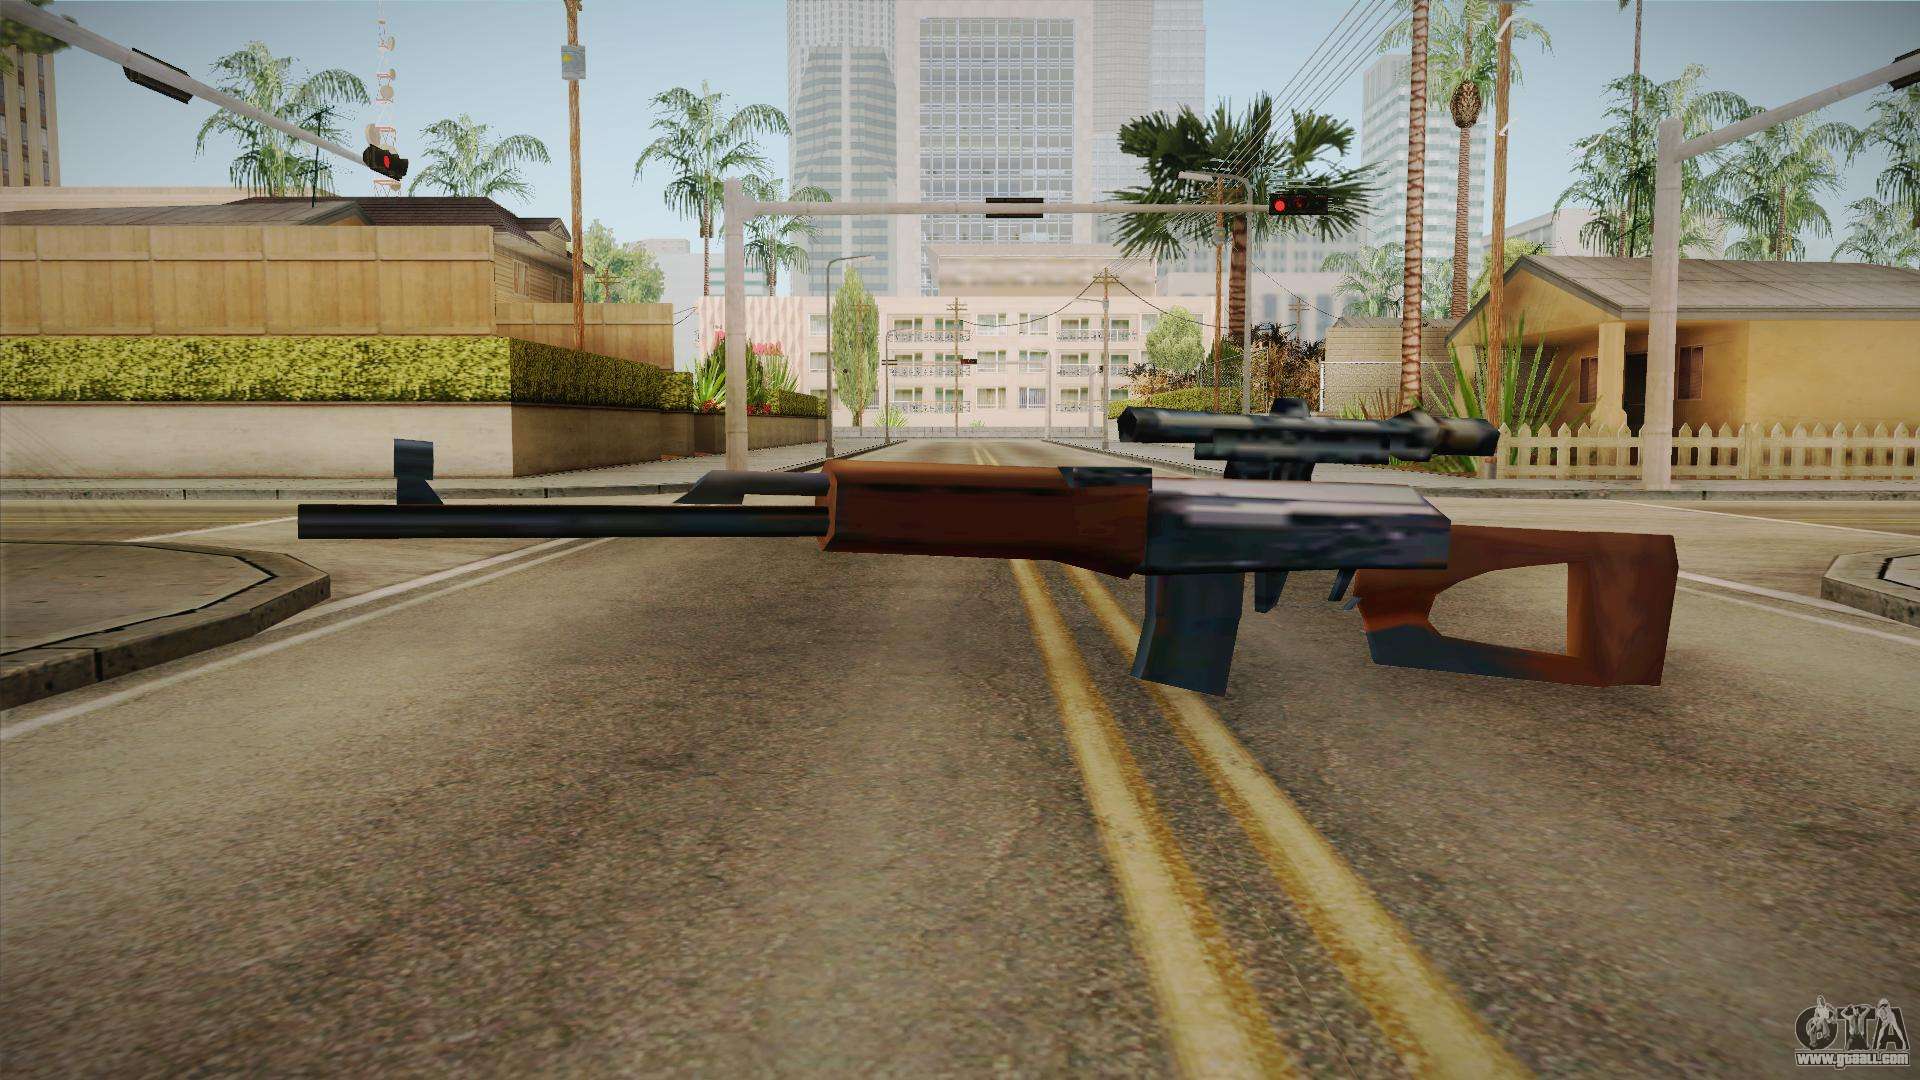 Fnd Low Polylow Quality Lq Weapons Los Santos Roleplay